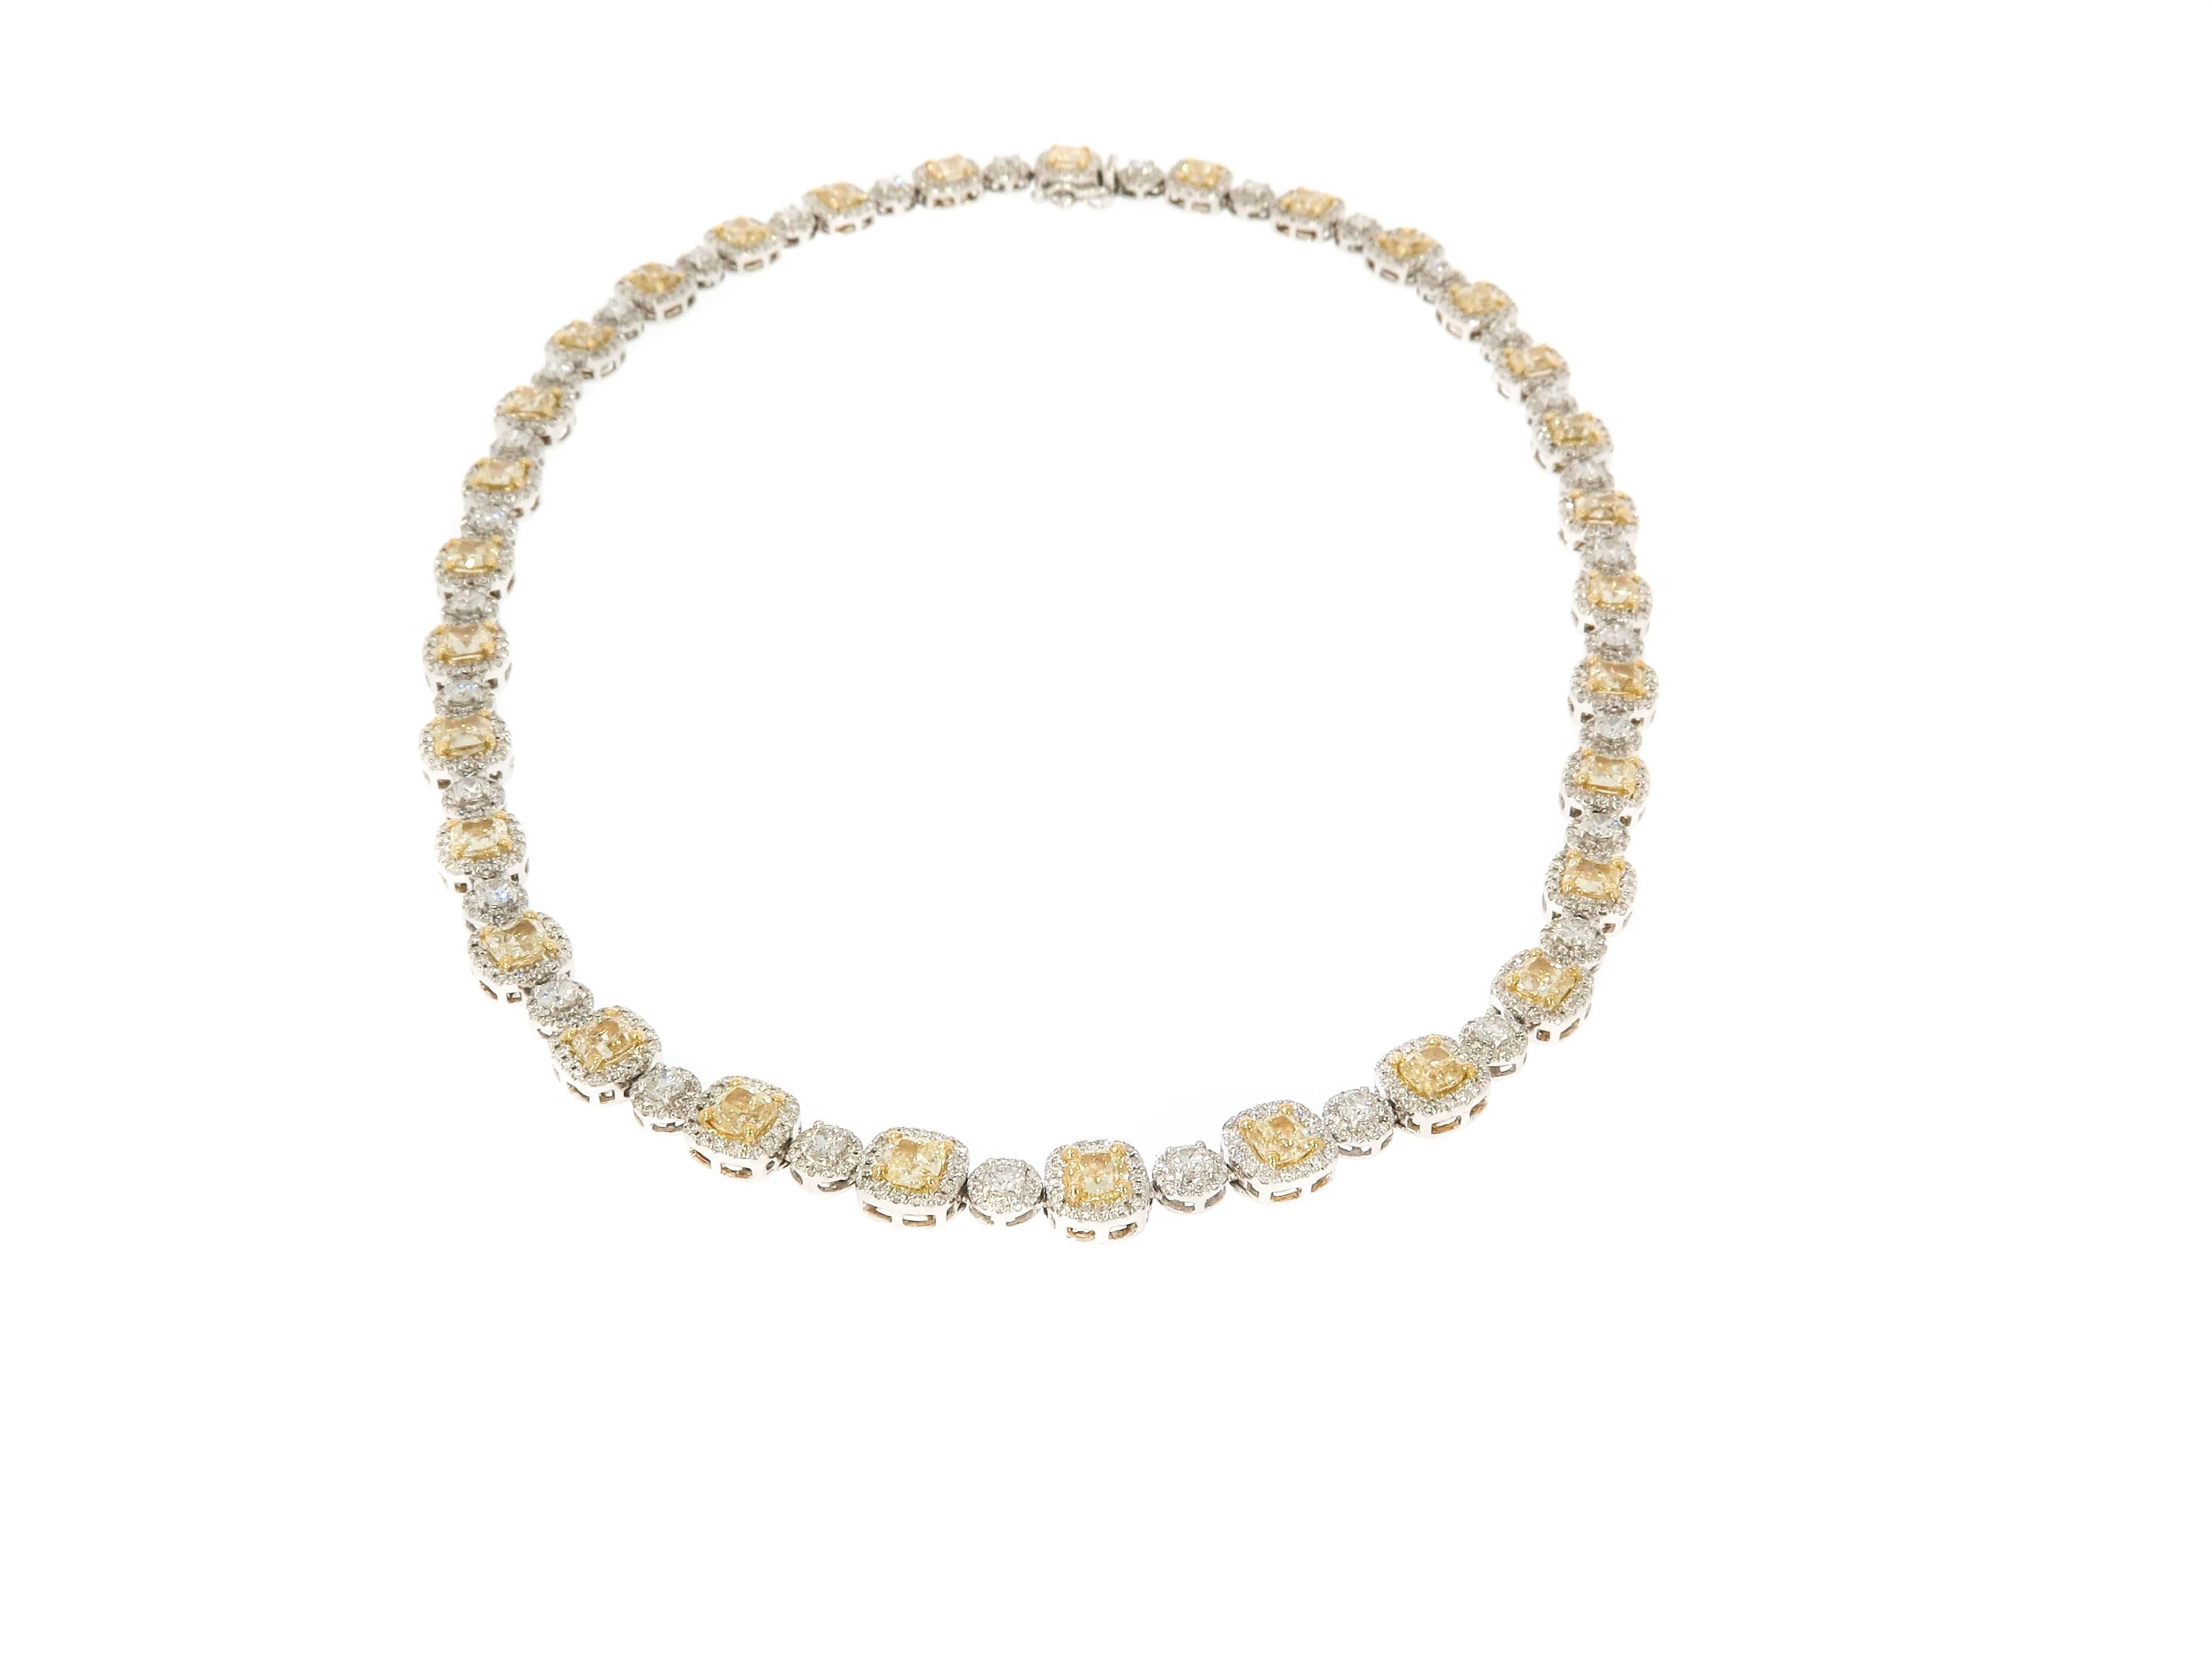 Elegance, grace, precision and technique are the characteristics of this precious necklace, that shows an extraordinary expert technical craftsmanship: the aesthetic result, in its classic and elegant design, is obtained by harmoniously measuring